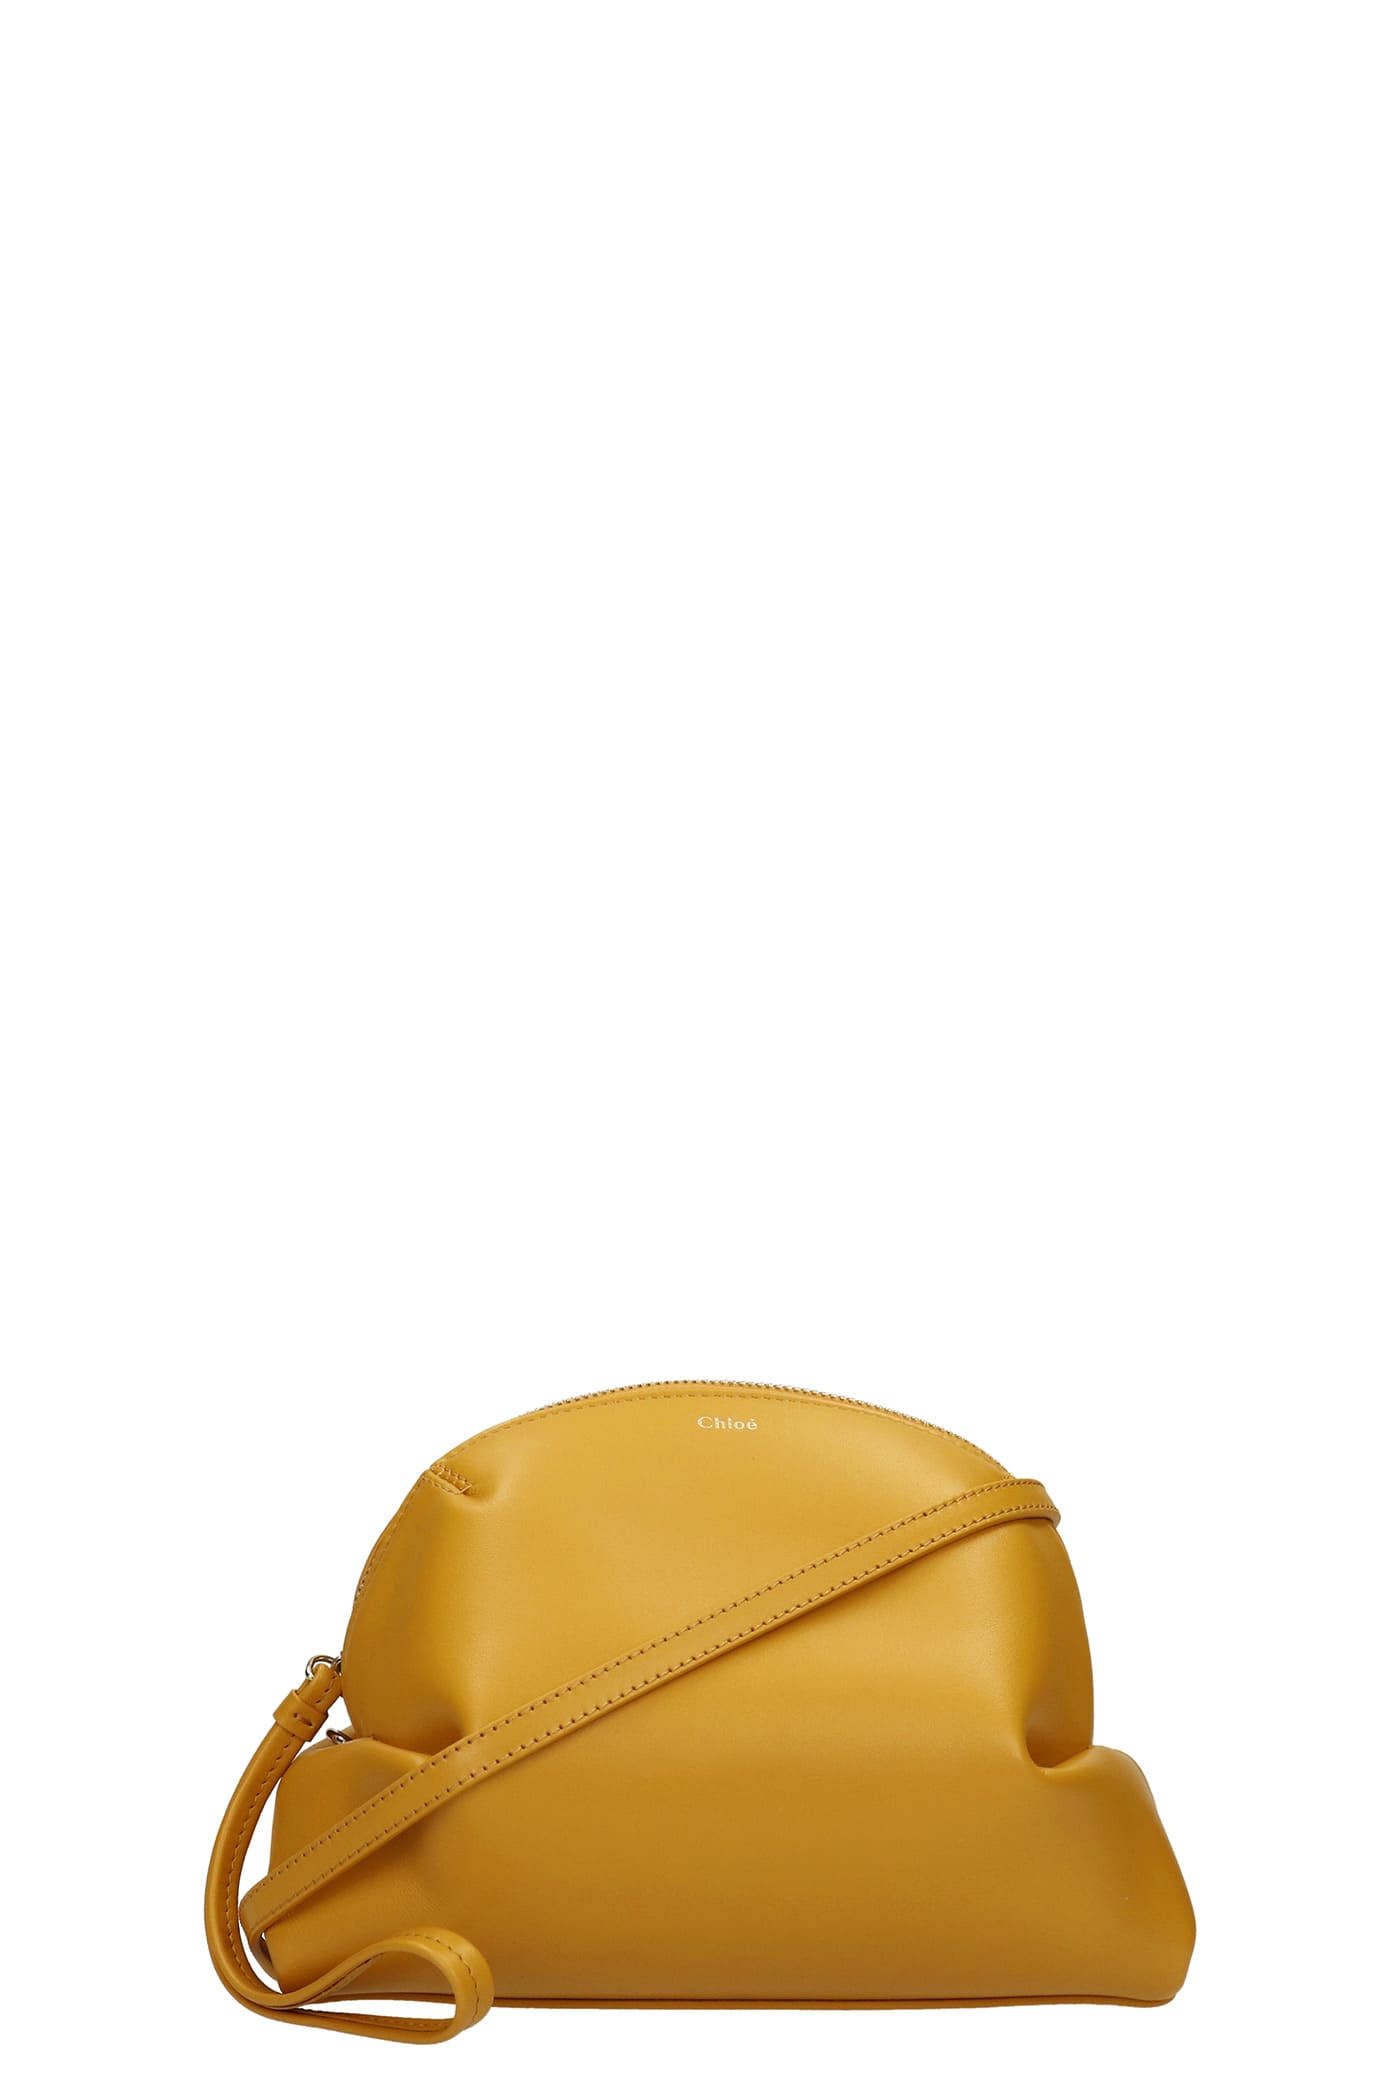 Chloé Judy Shoulder Bag In Yellow Leather